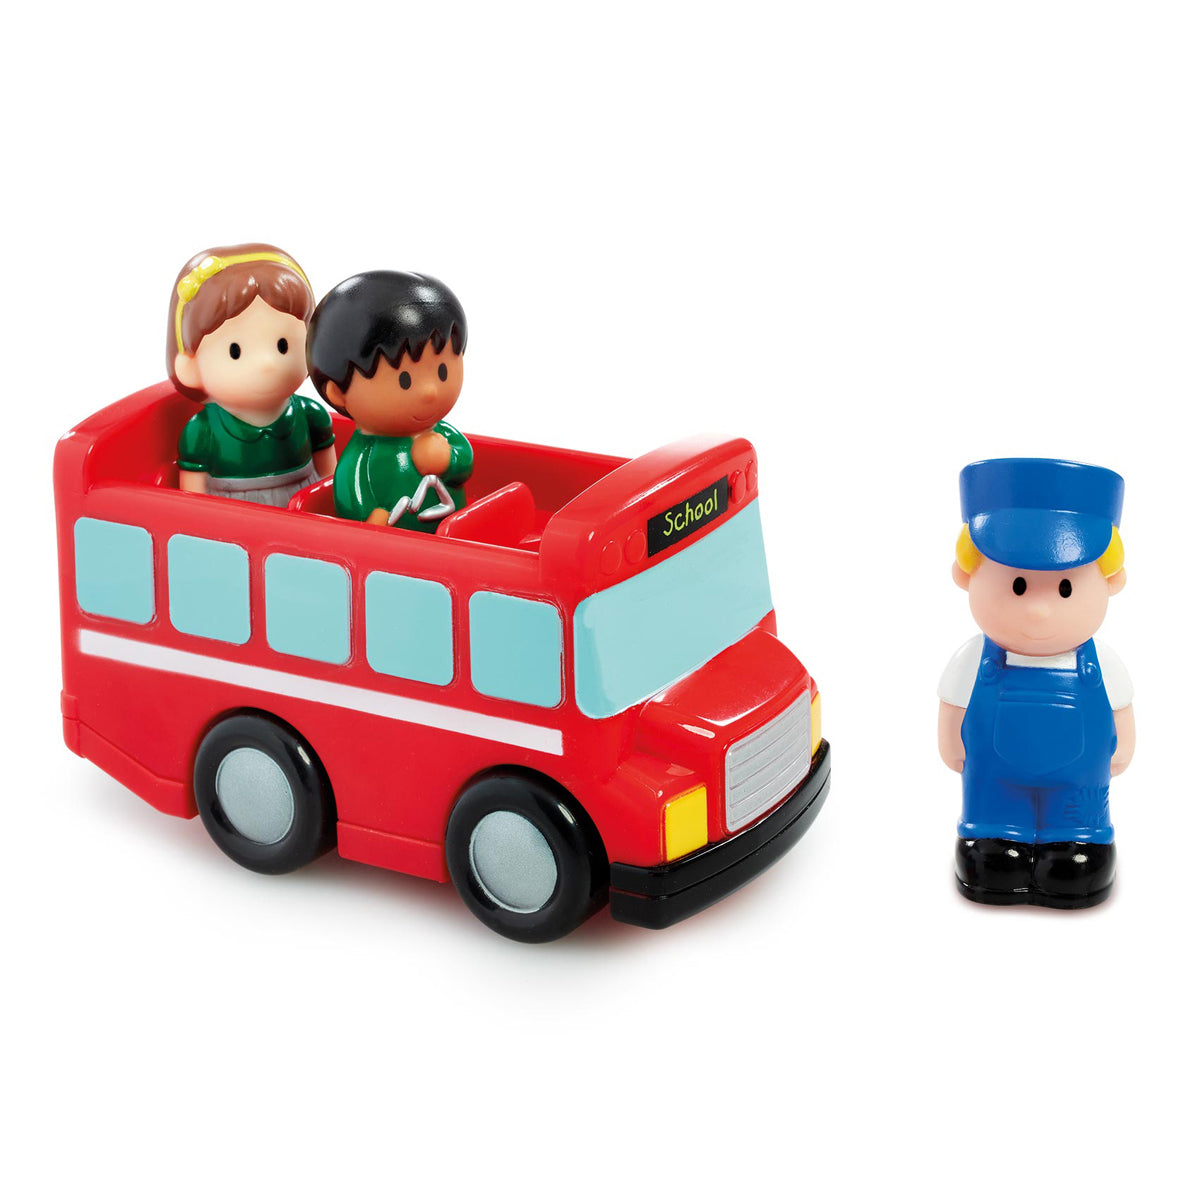 Happyland School Bus with Driver and Children Figures